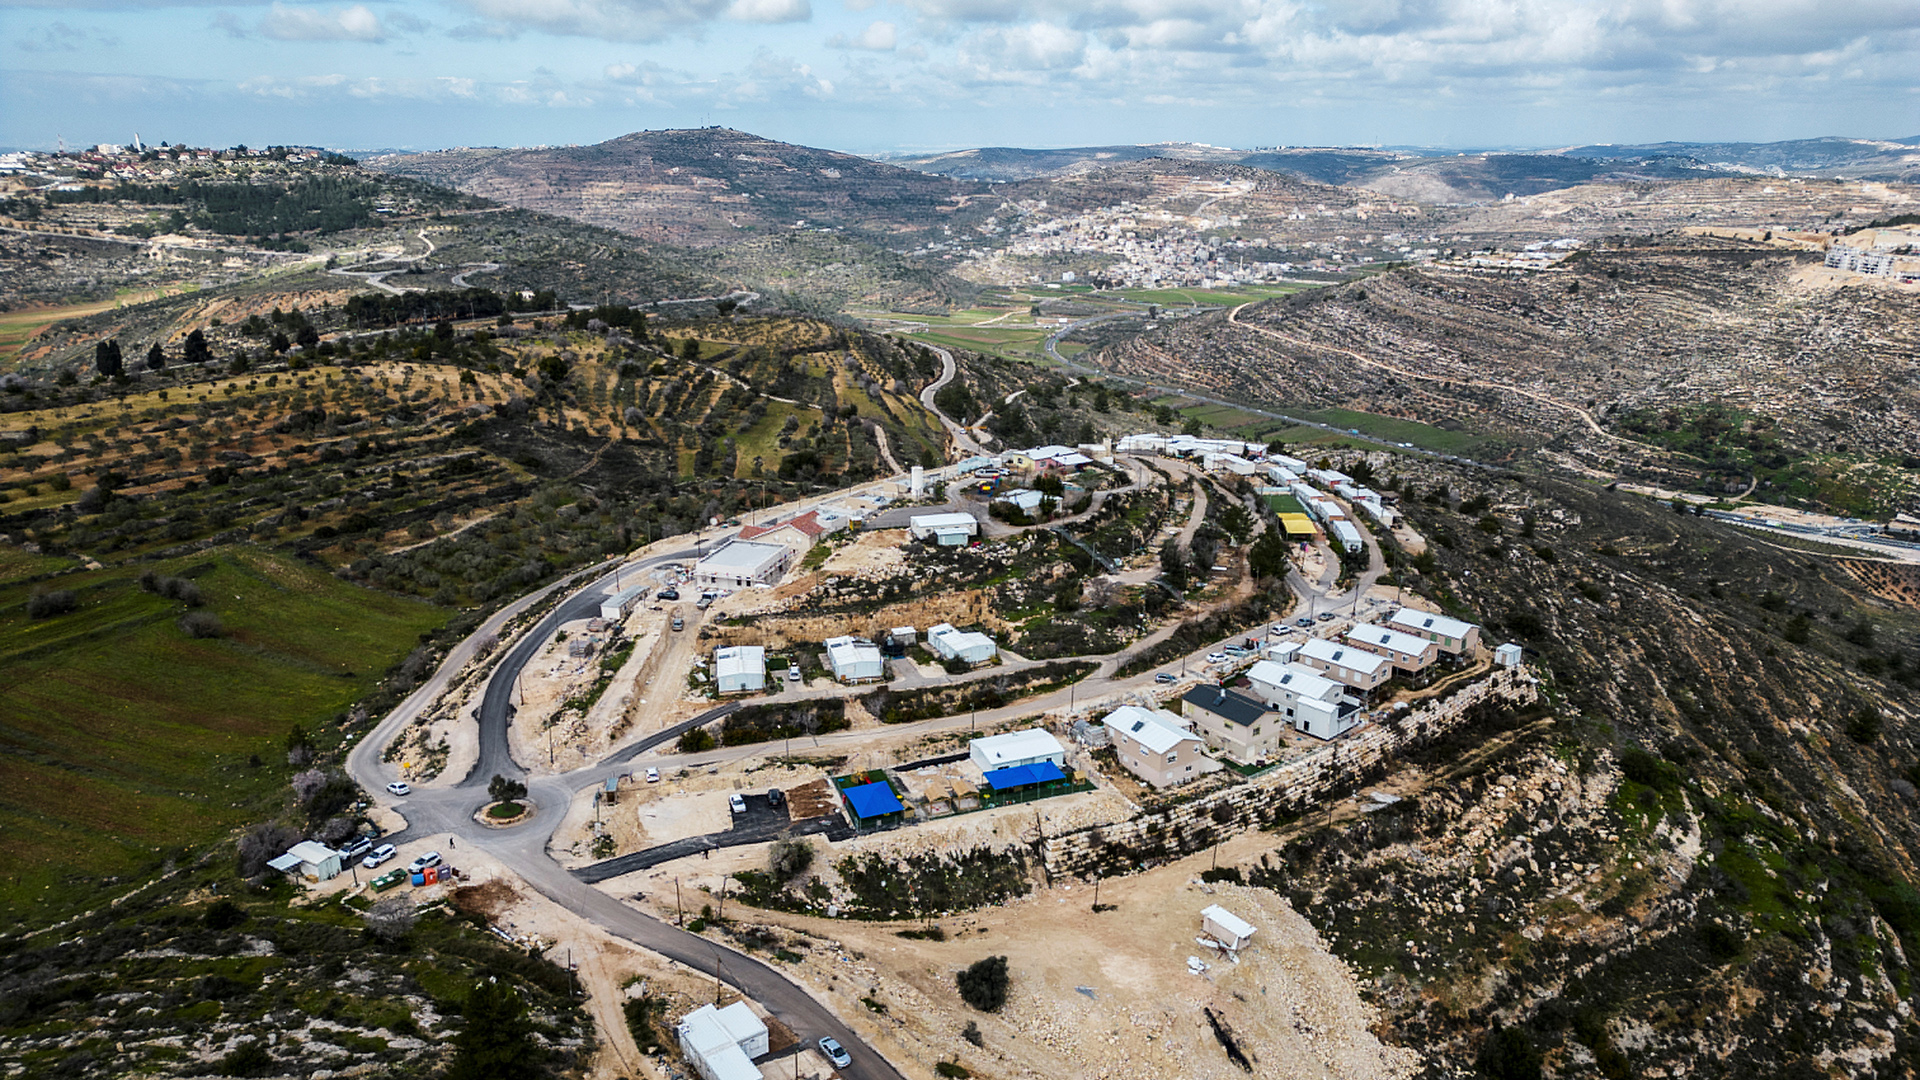 7,000 housing units in the West Bank: Israel approves new settler housing